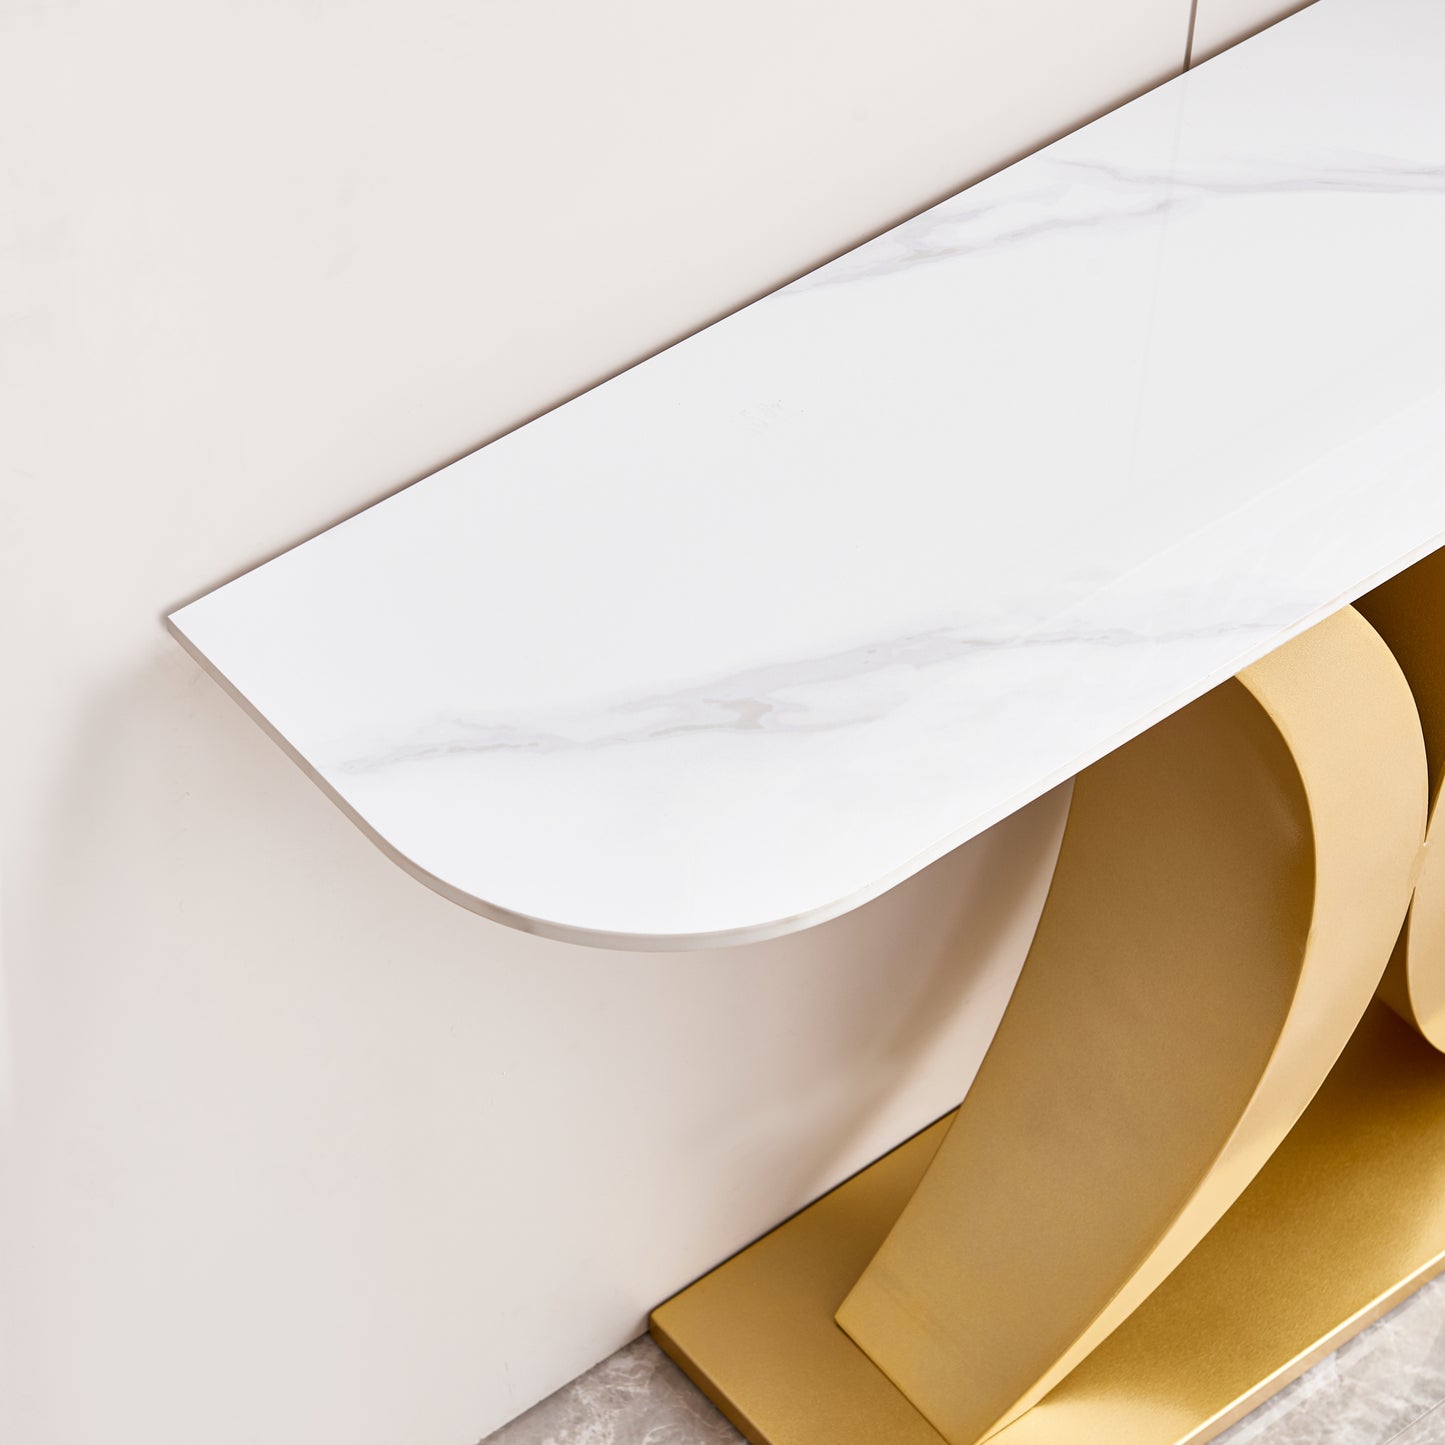 Double Moon Console Table (gold)